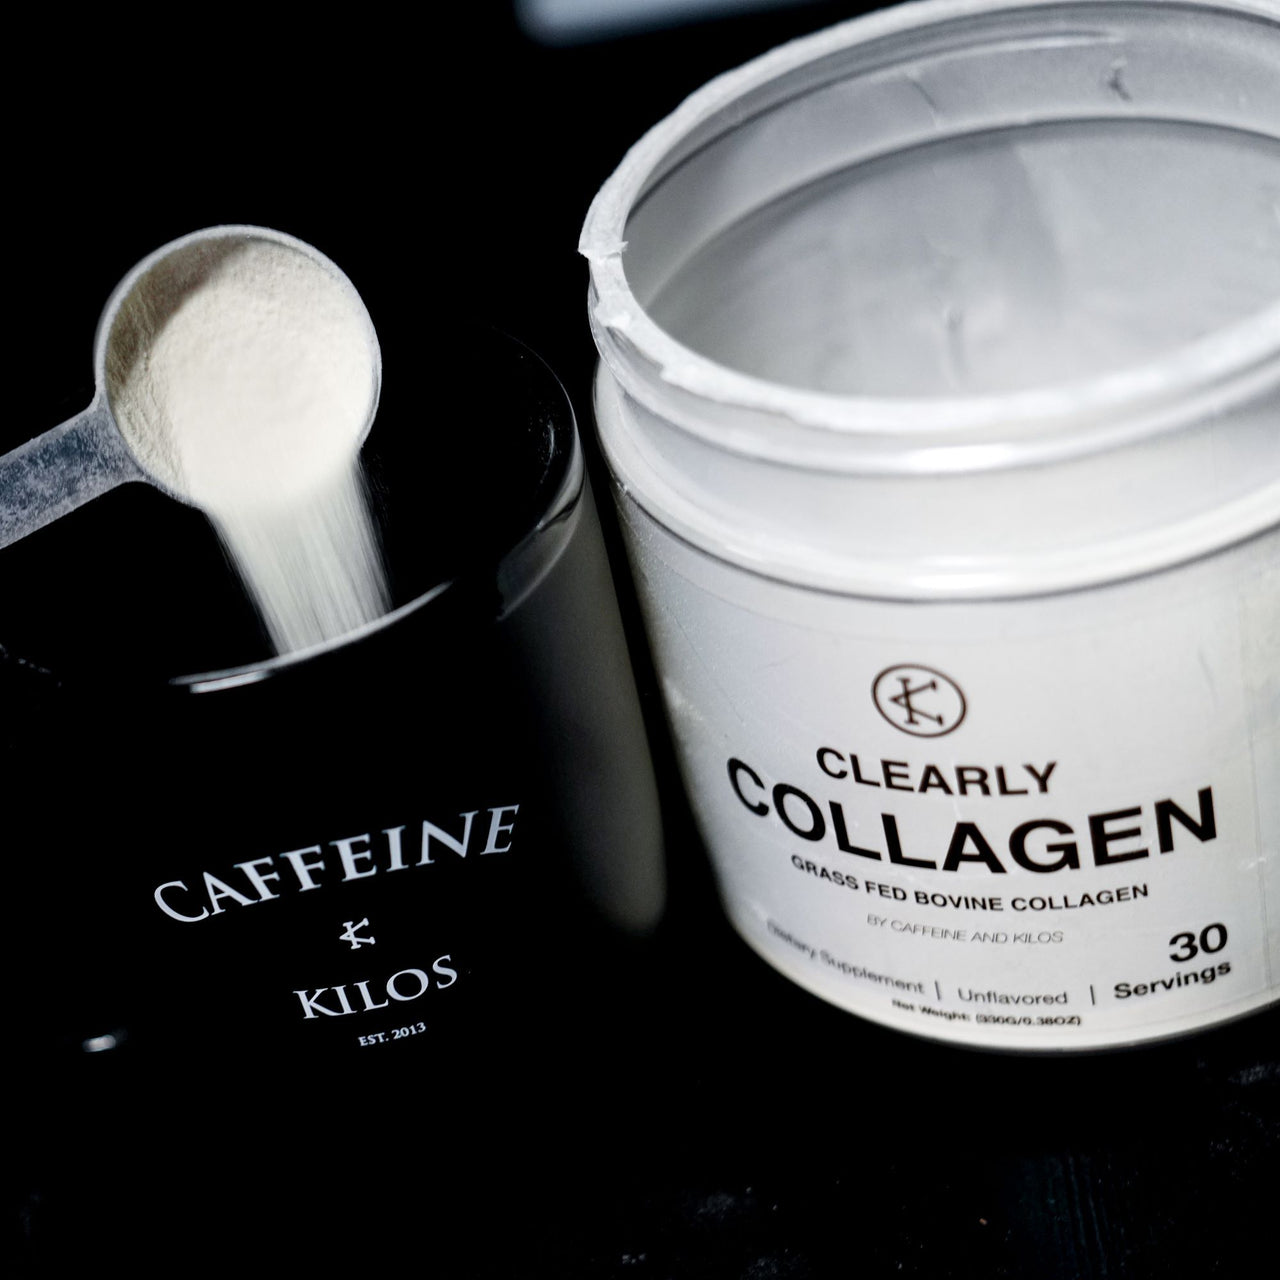 Caffeine and Kilos Inc Consumables Clearly Collagen